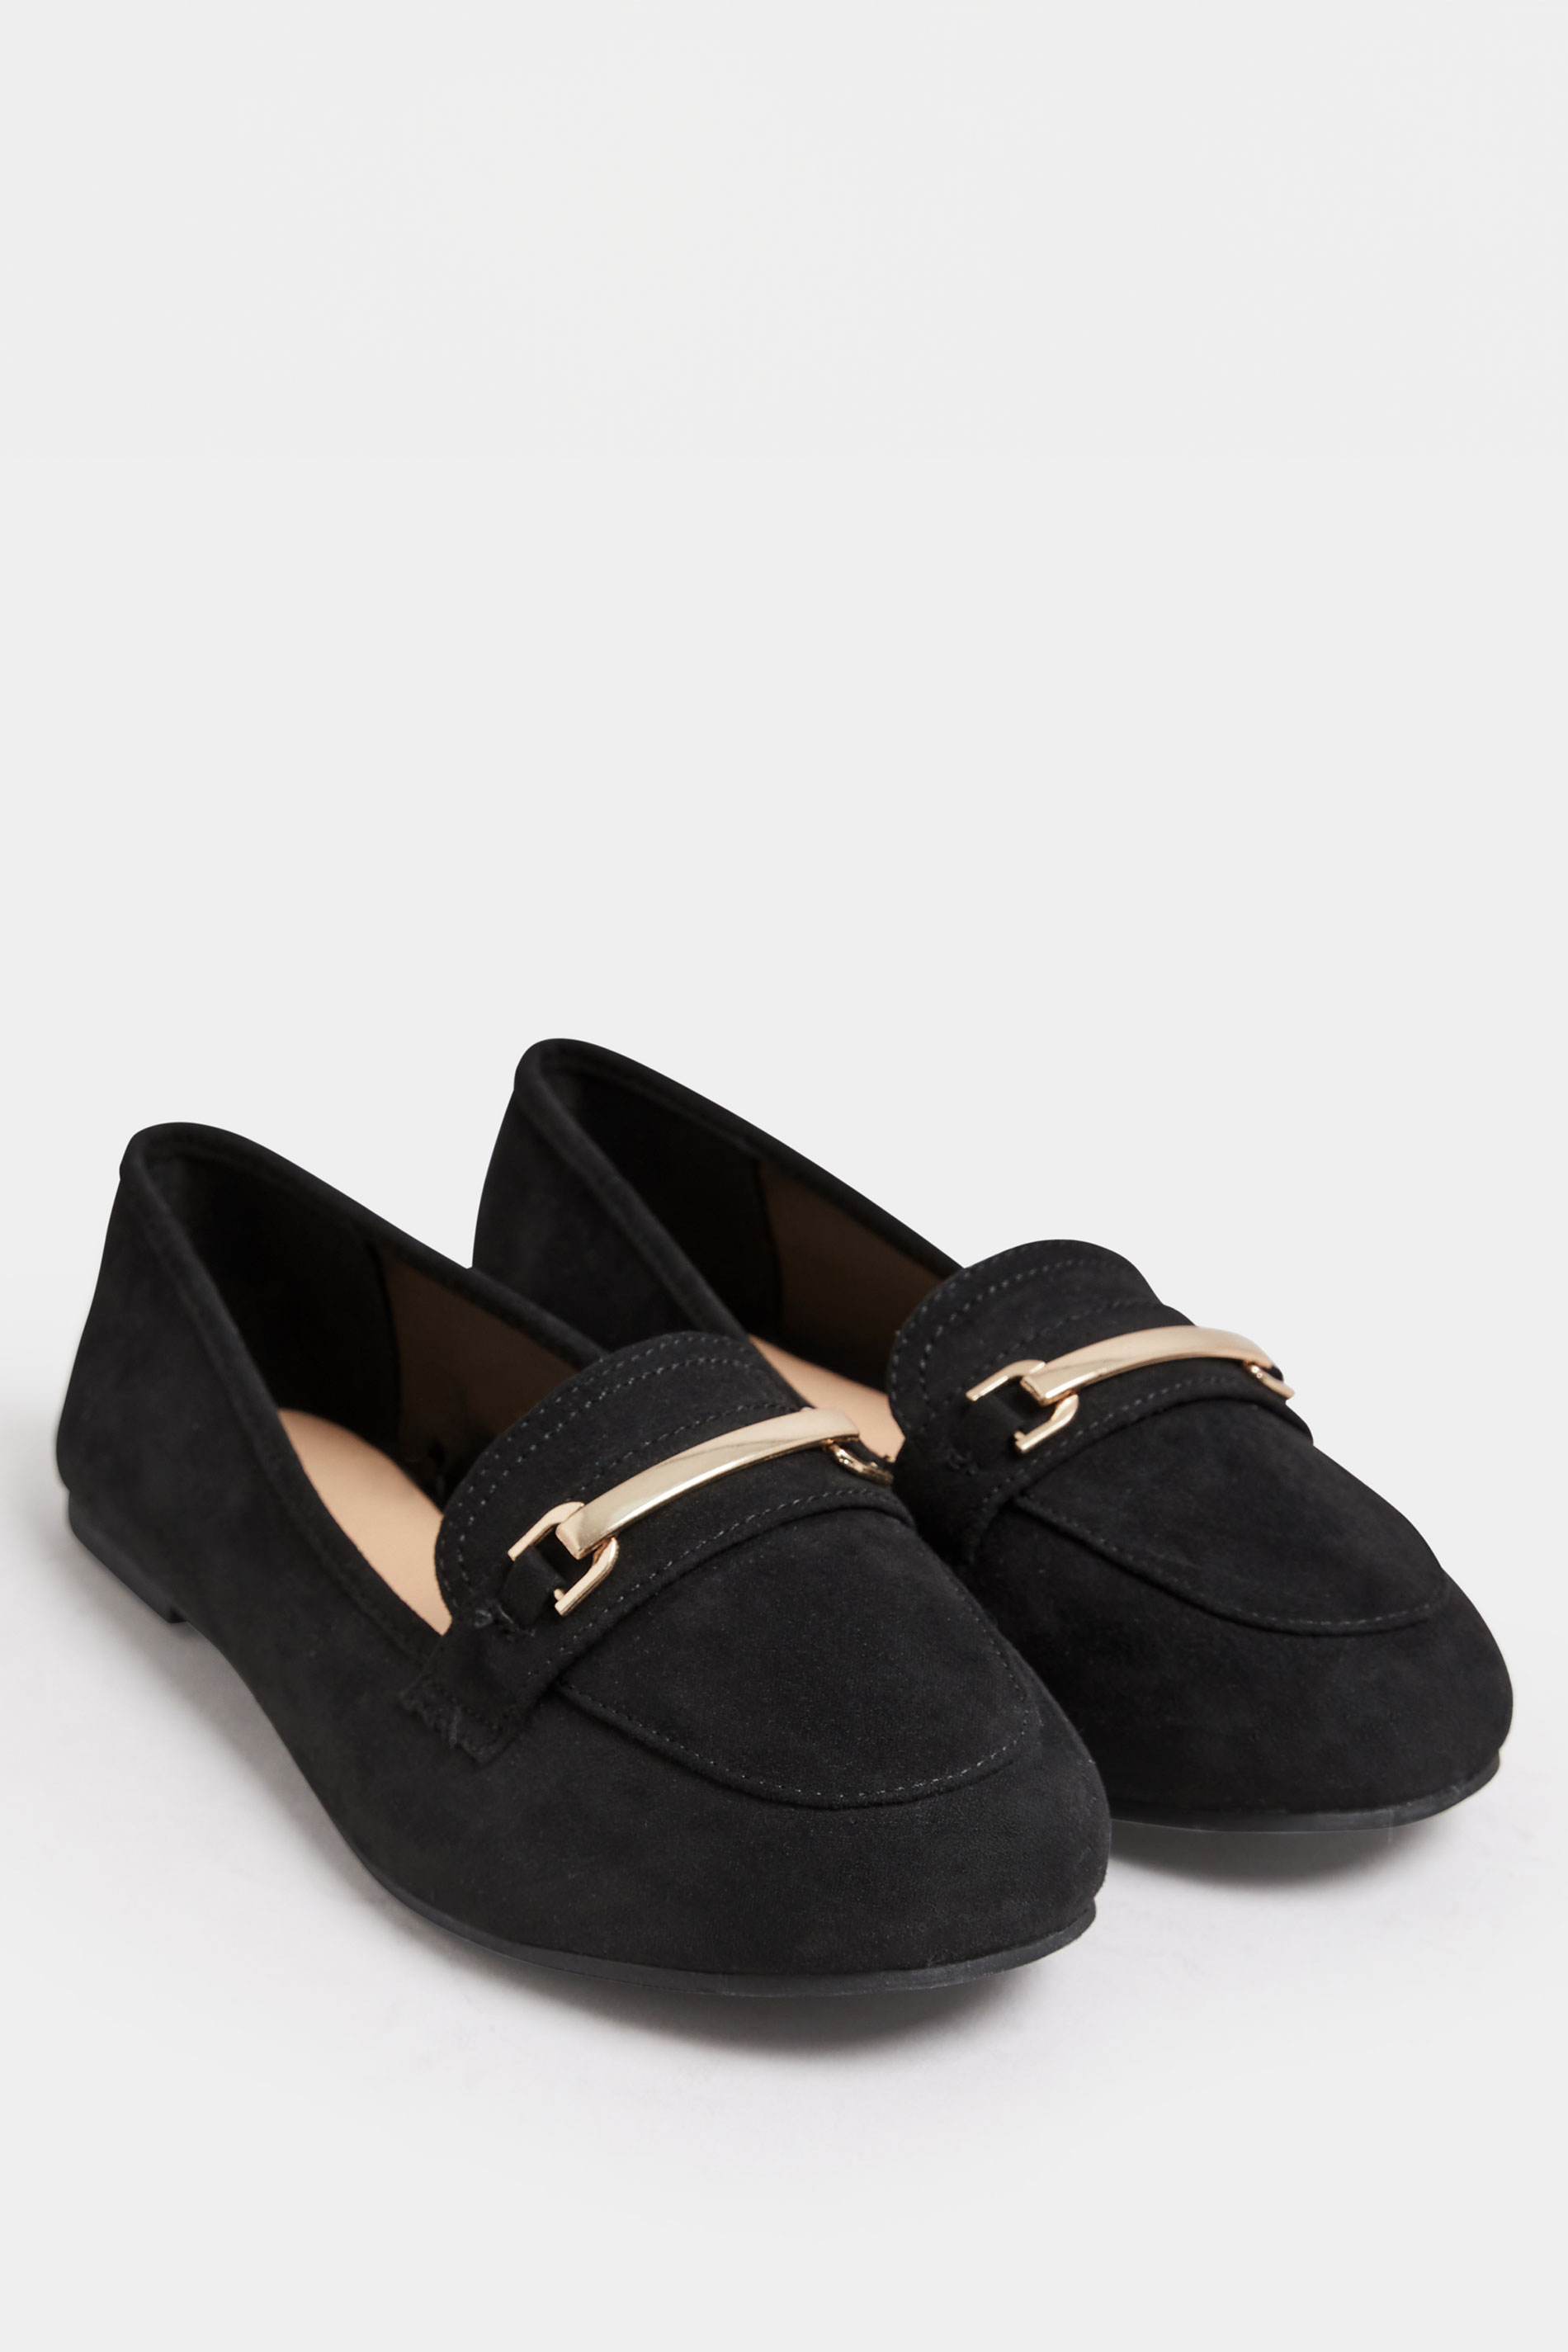 Black Faux Suede Buckle Loafers In Extra Wide EEE Fit | Yours Clothing 2